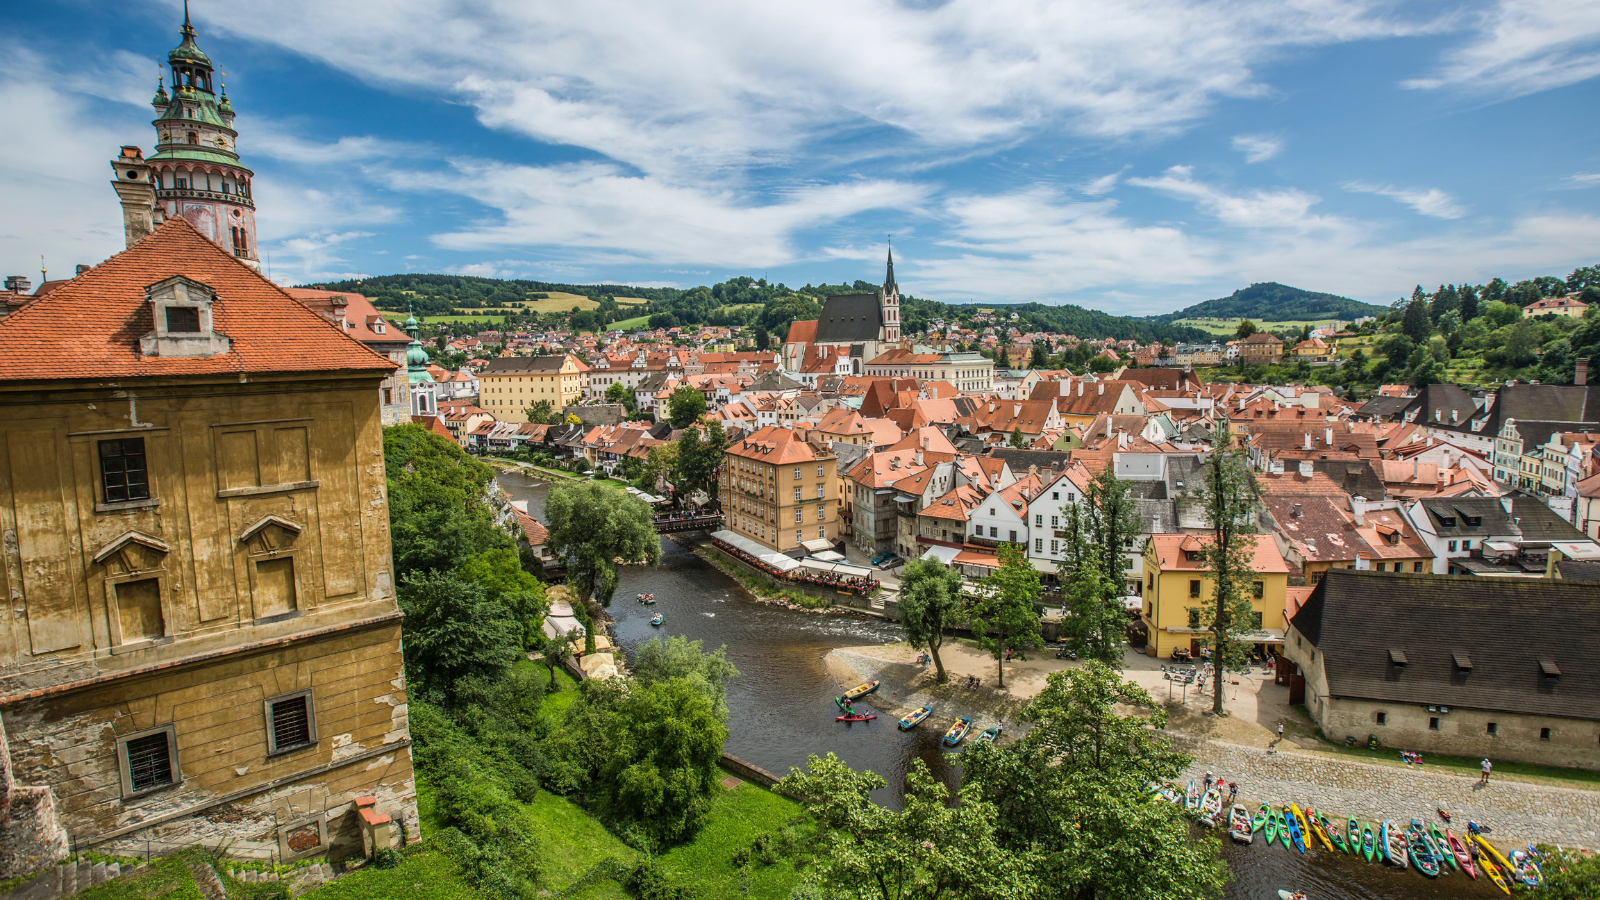 Visit the Renaissance town of Český Krumlov - seventh thing in the list of 10 best things to do in Czech Republic